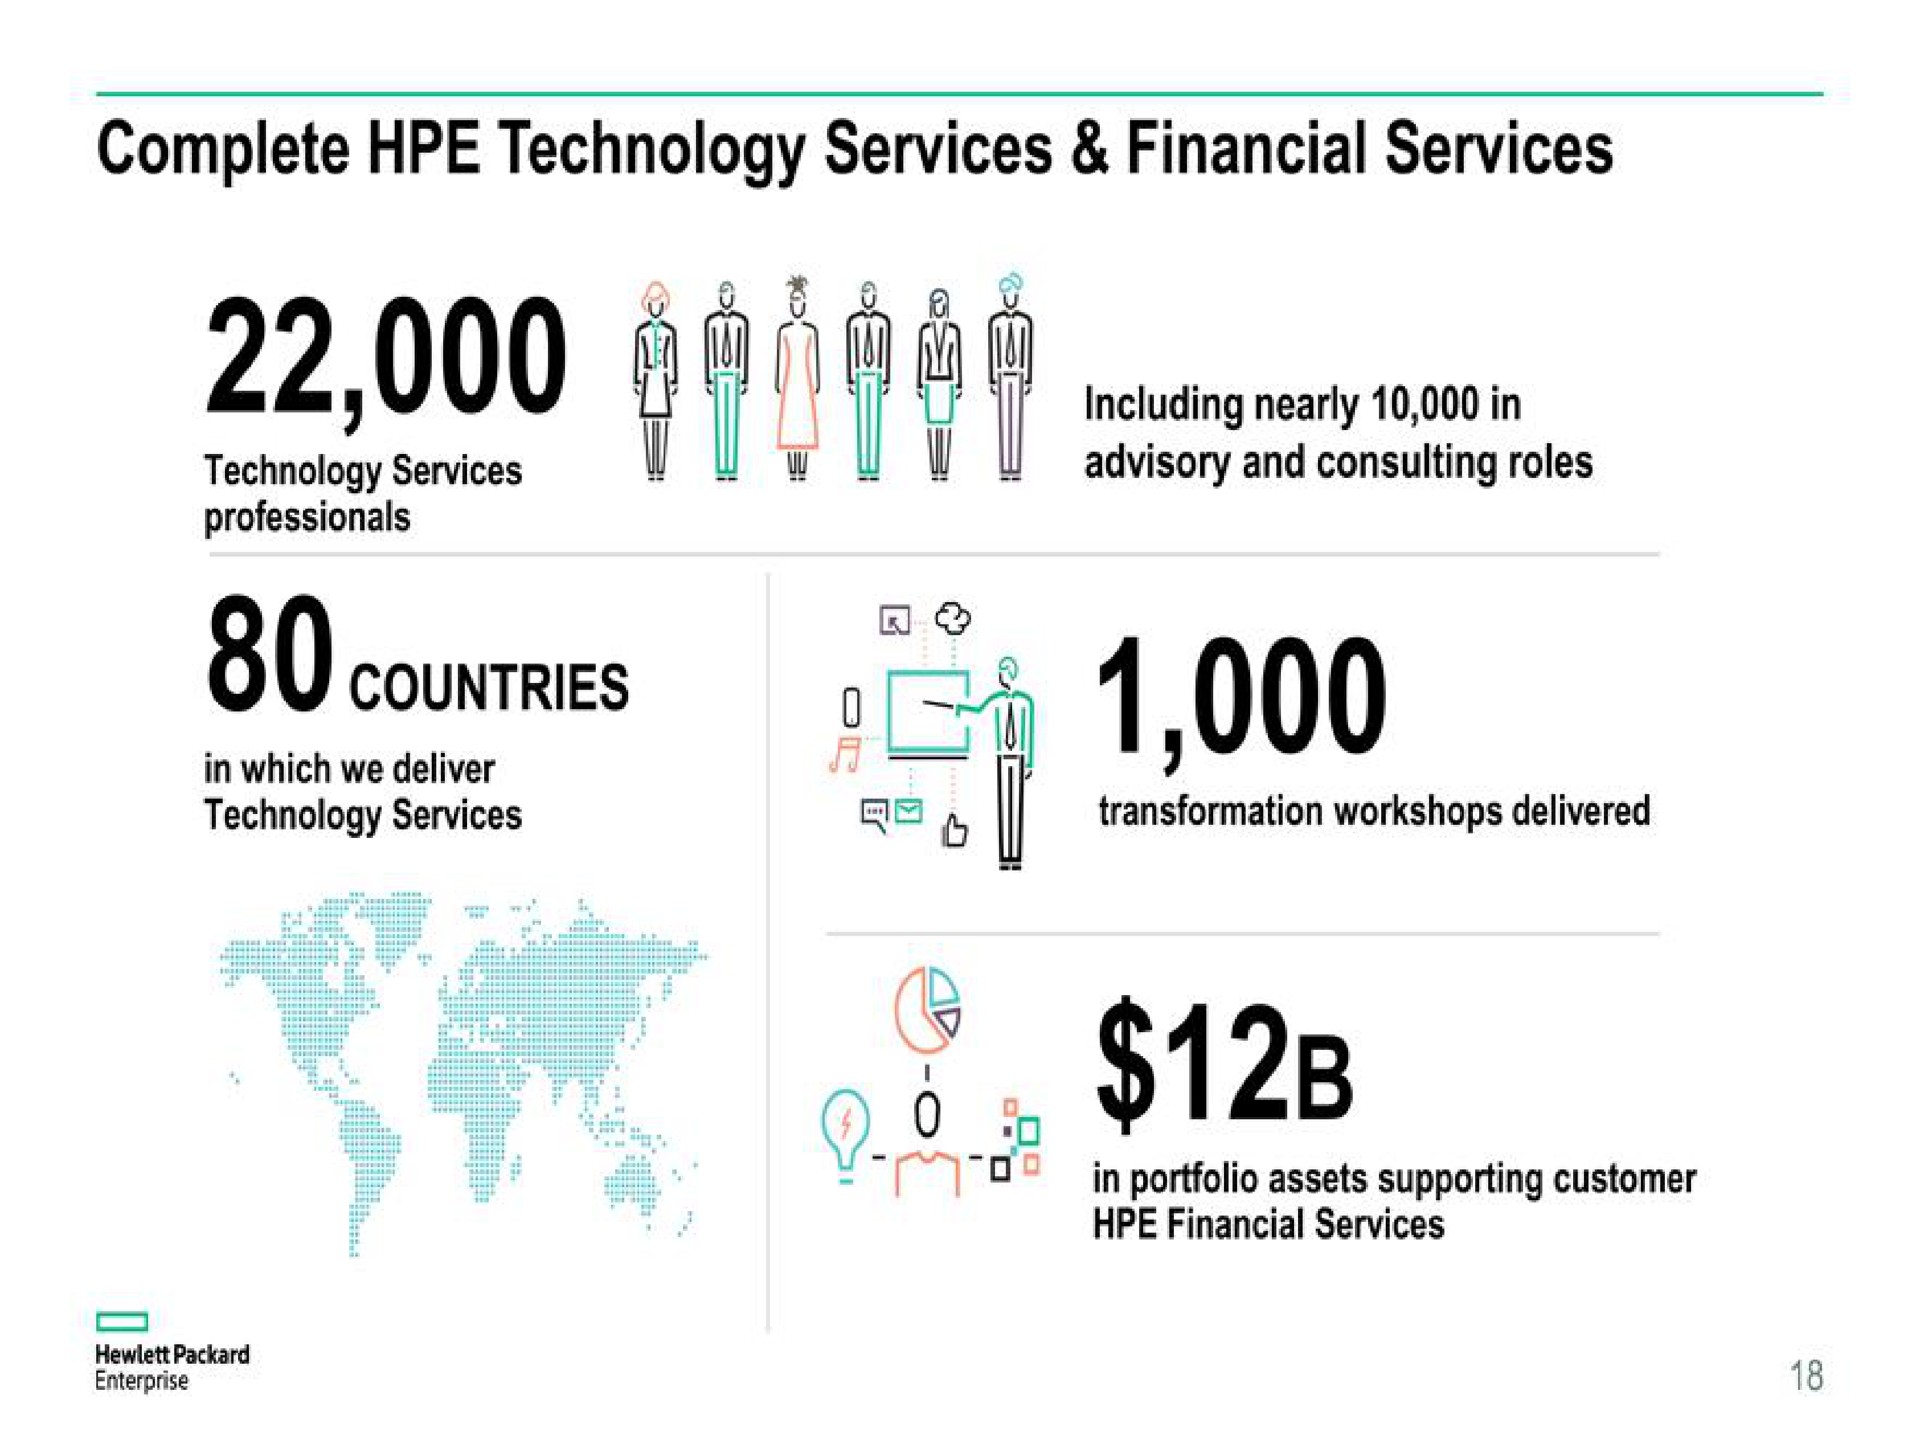 complete technology services financial services countries i | Hewlett Packard Enterprise